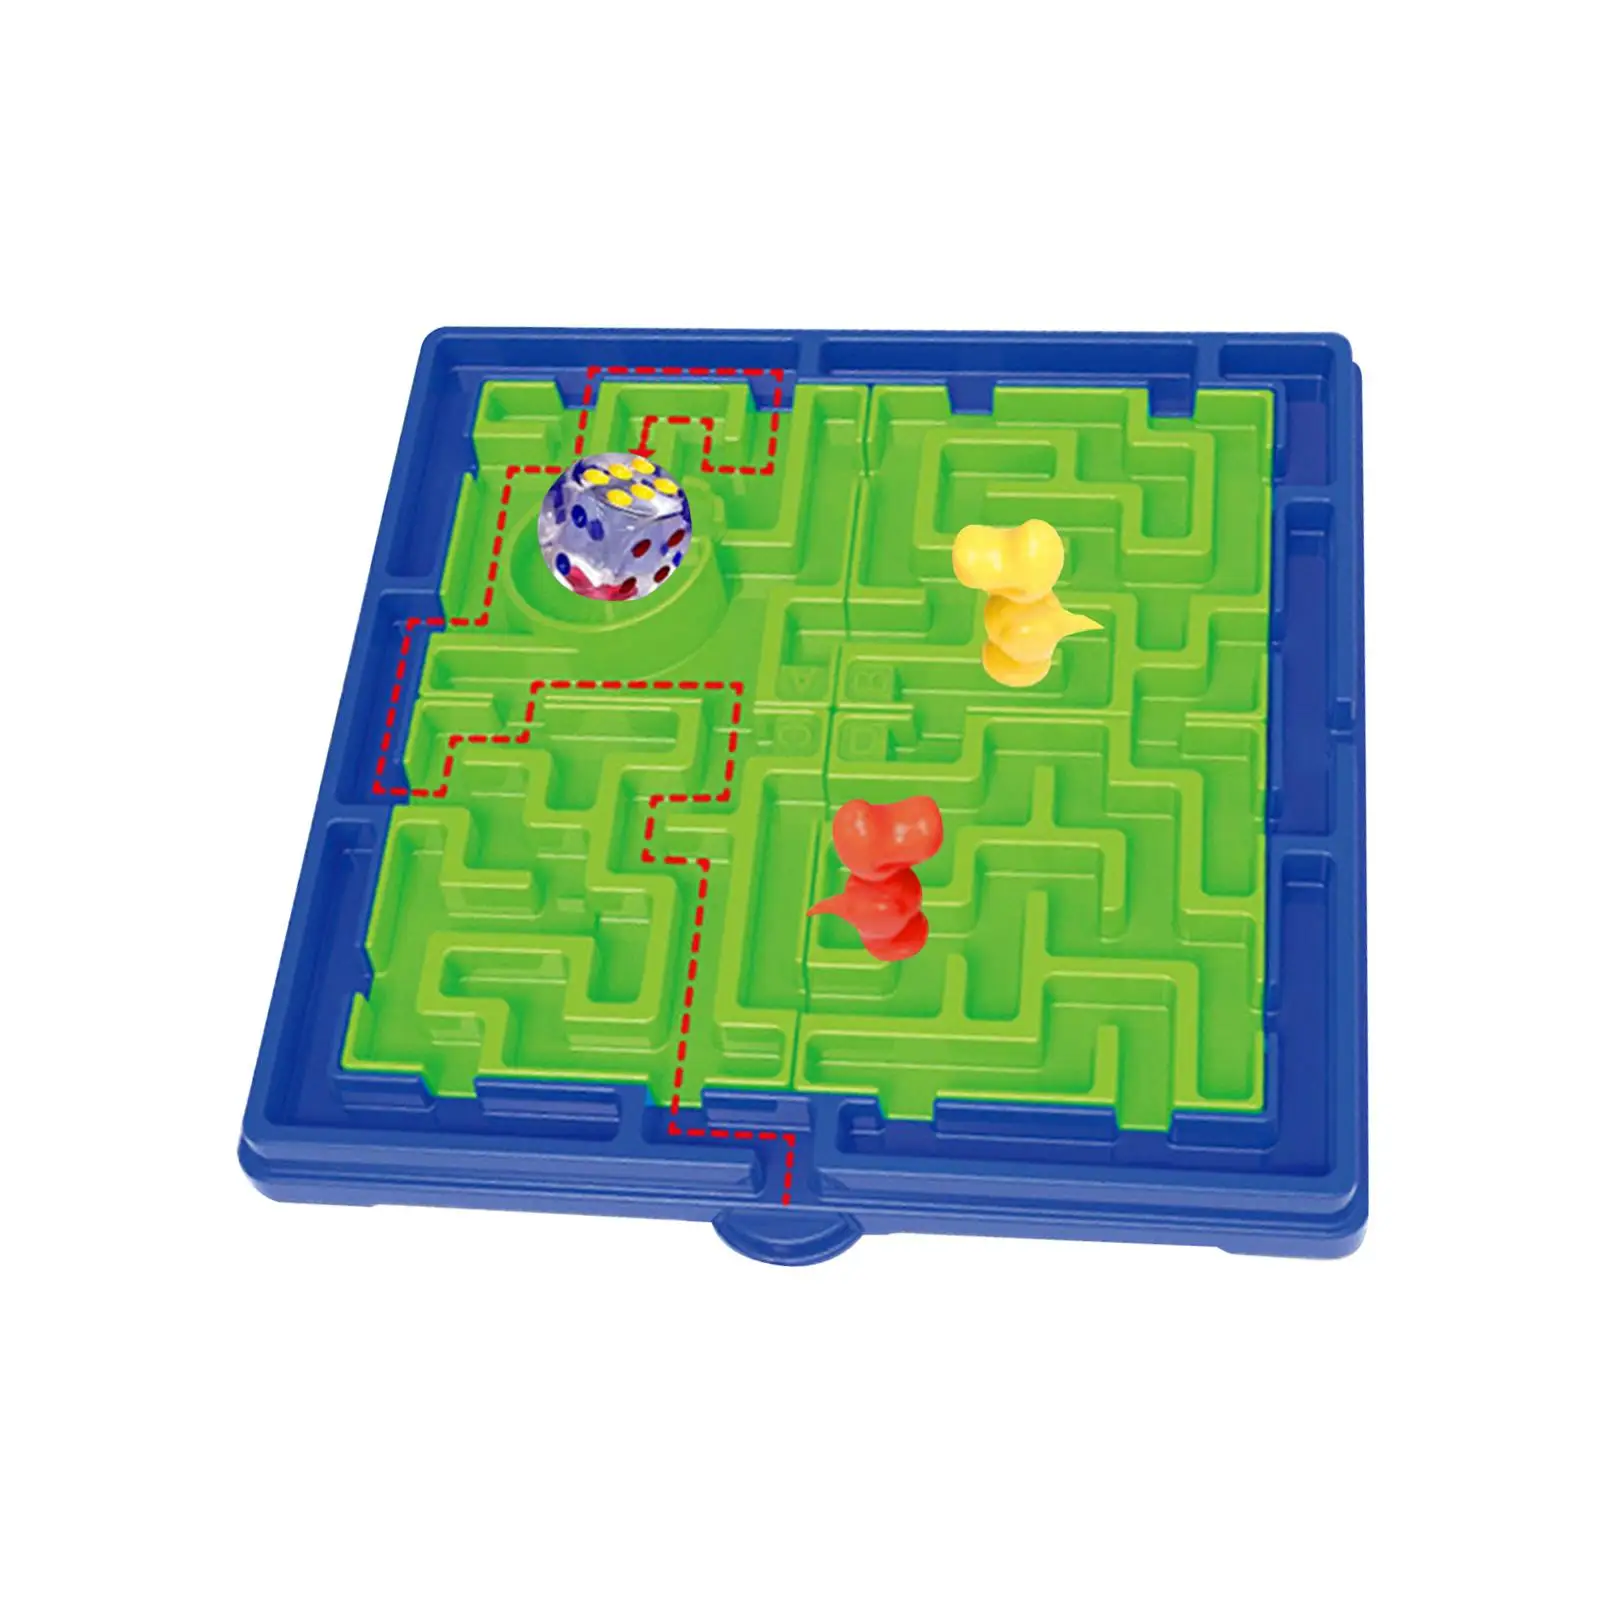 DIY Accessories Labyrinth Game Learning game Games Educational Toys Balance Maze for Kids